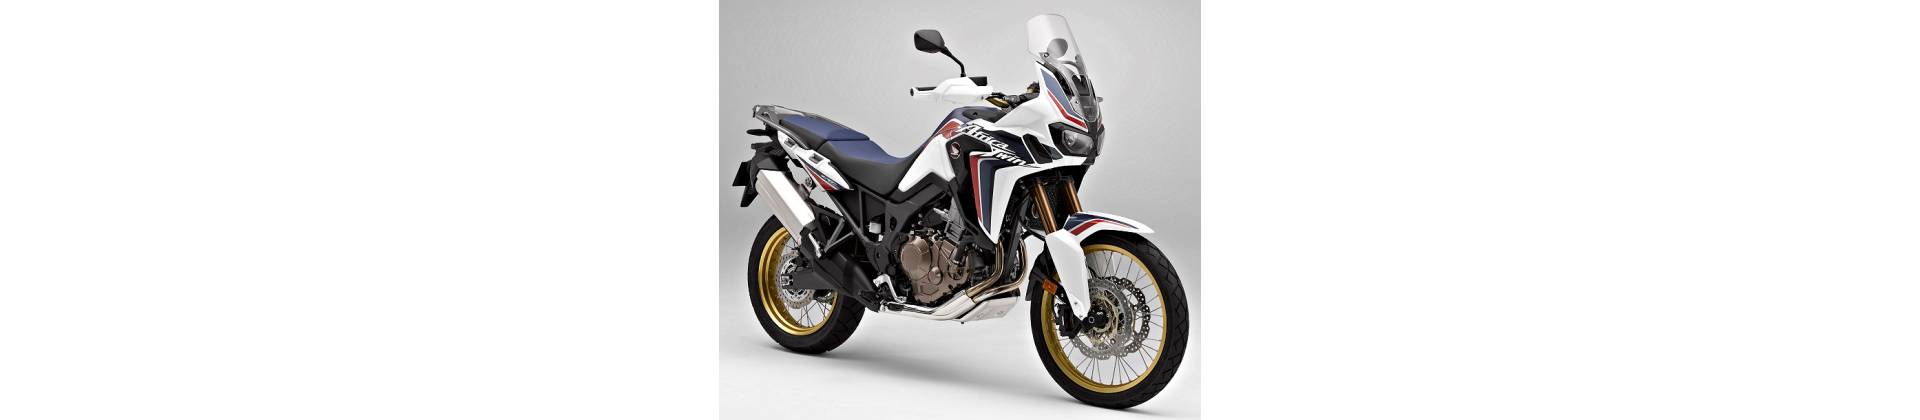 CRF1000L AFRICA TWIN 18-19